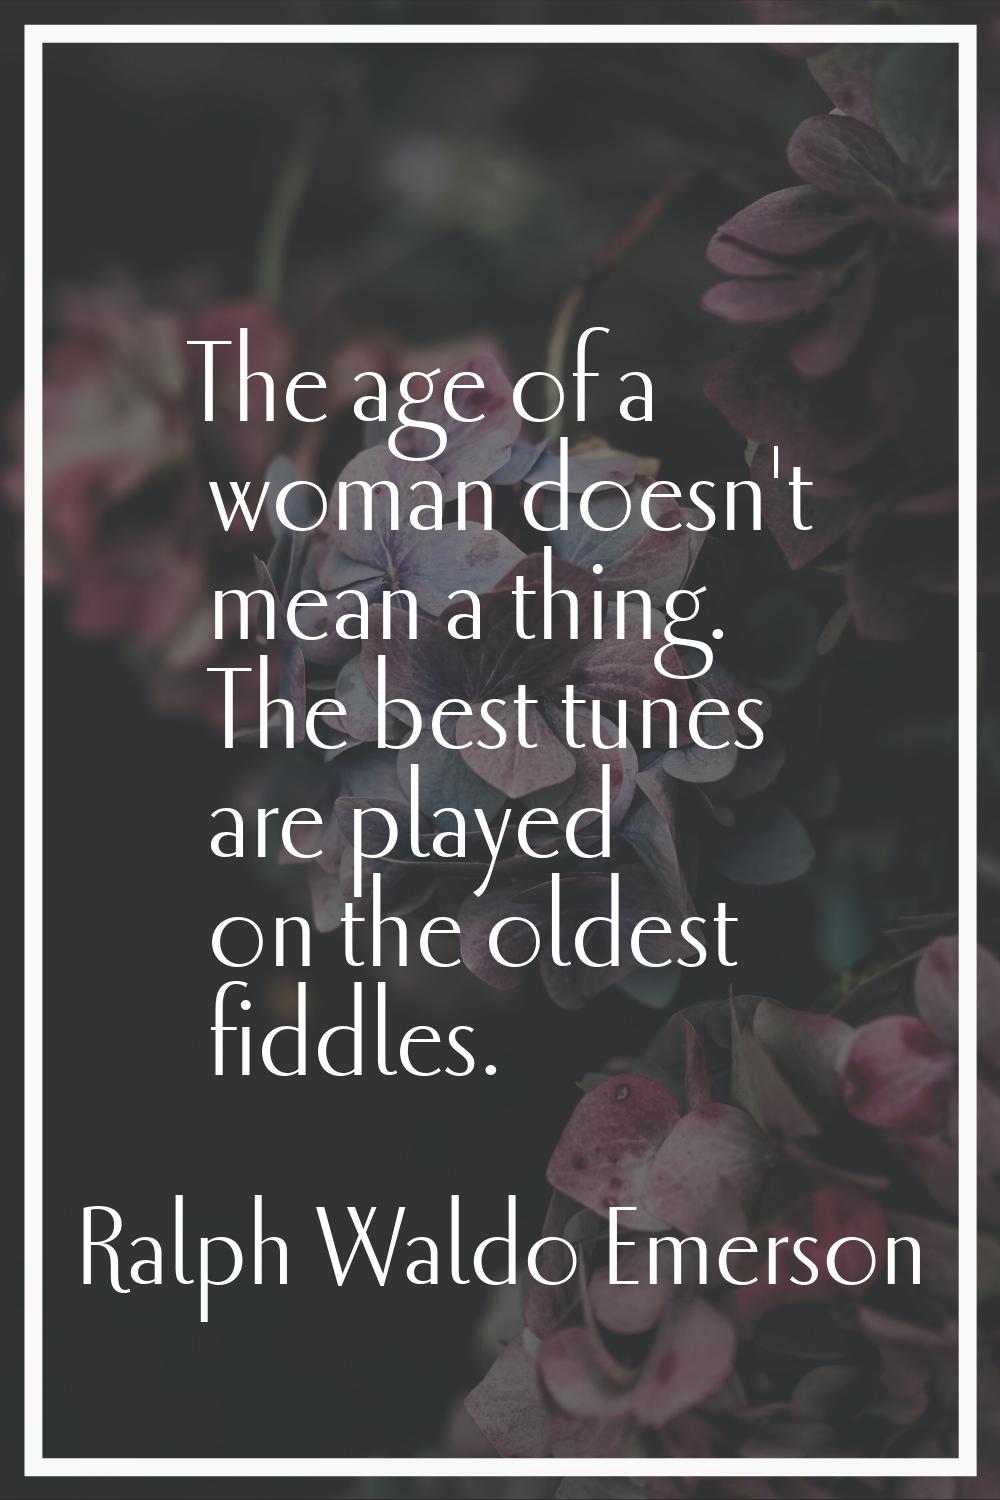 The age of a woman doesn't mean a thing. The best tunes are played on the oldest fiddles.